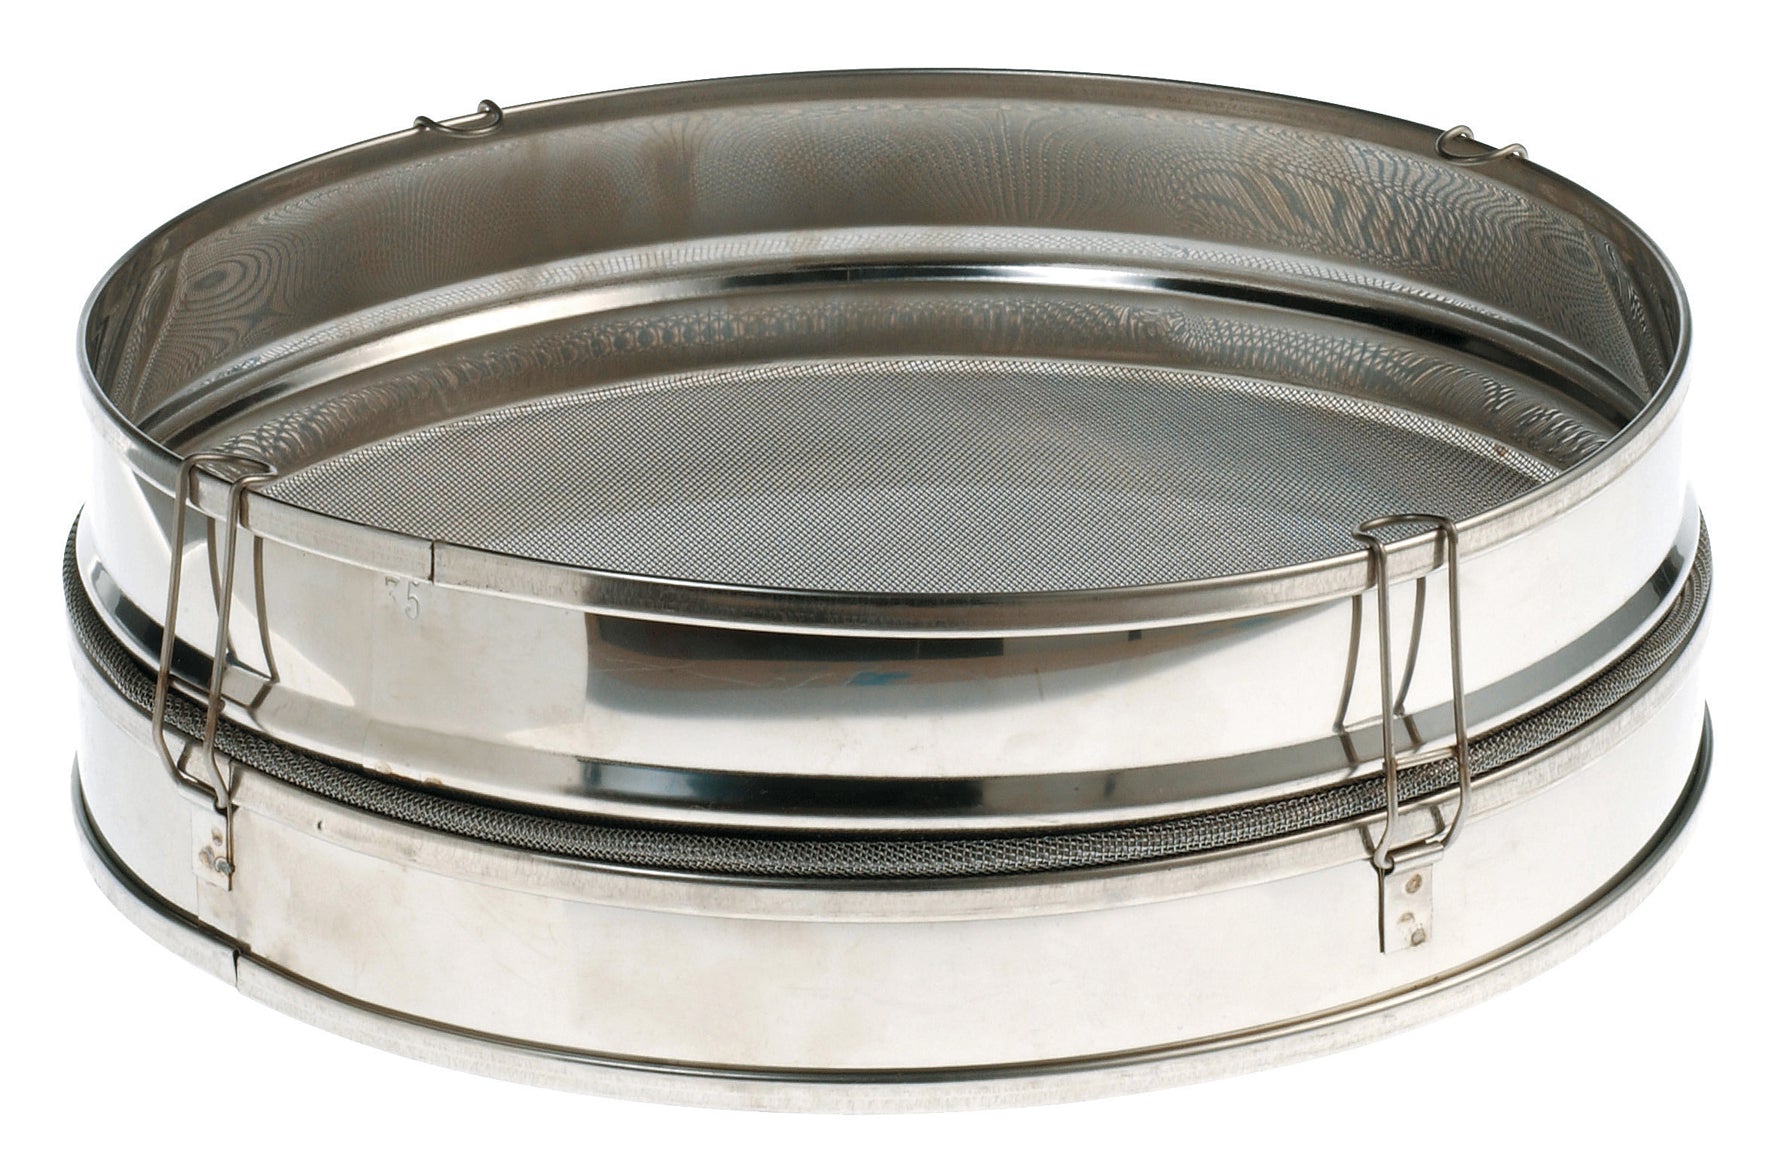 Picture of LouisTellier NC5064660 Sieve (medium size)